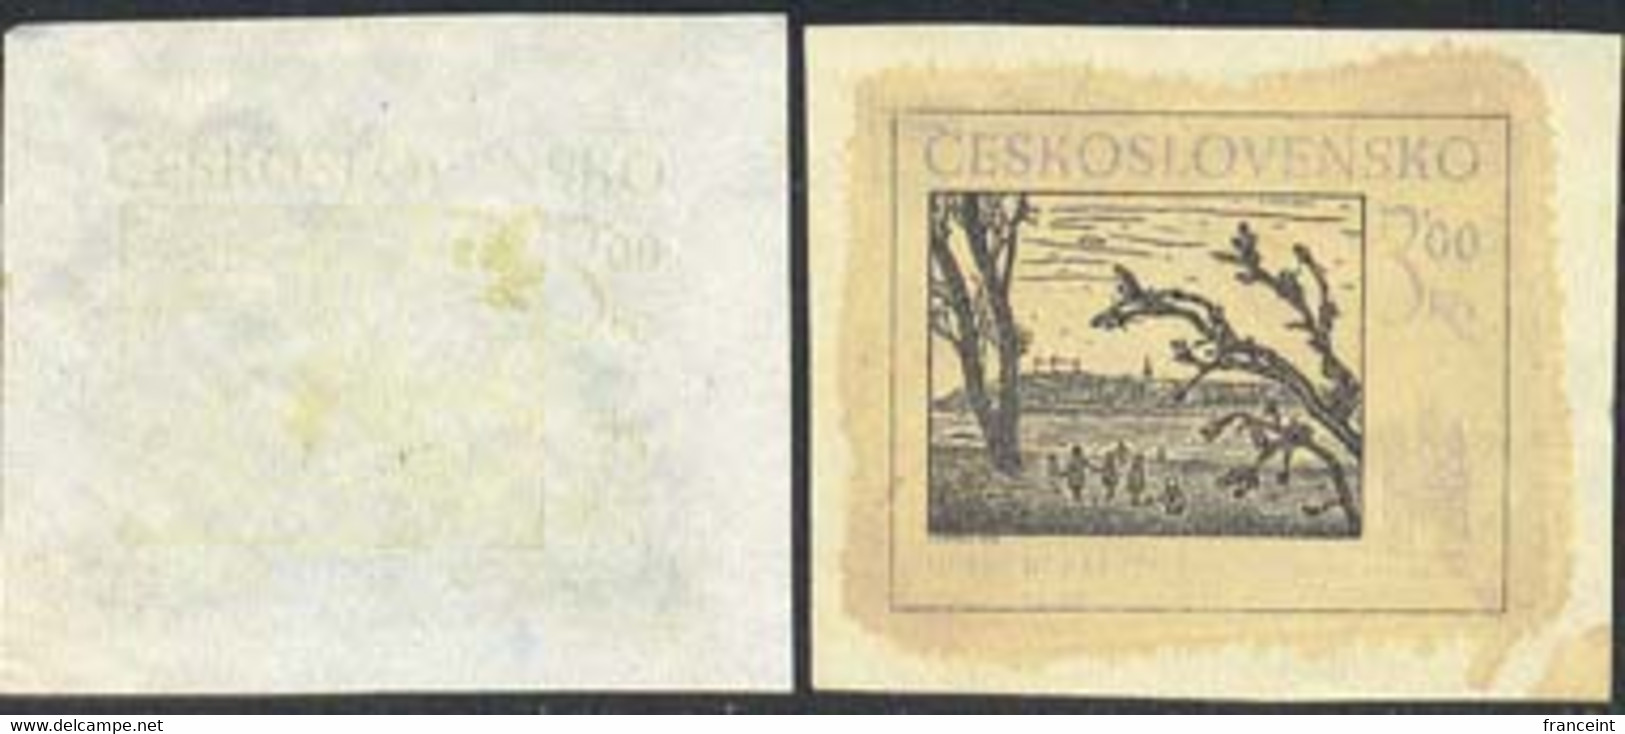 CZECHOSLOVAKIA (1978) Bratislava In 1955. Pair Of Die Proofs, One Very Faint, 2nd In Black. Scott No 2174 - Prove E Ristampe